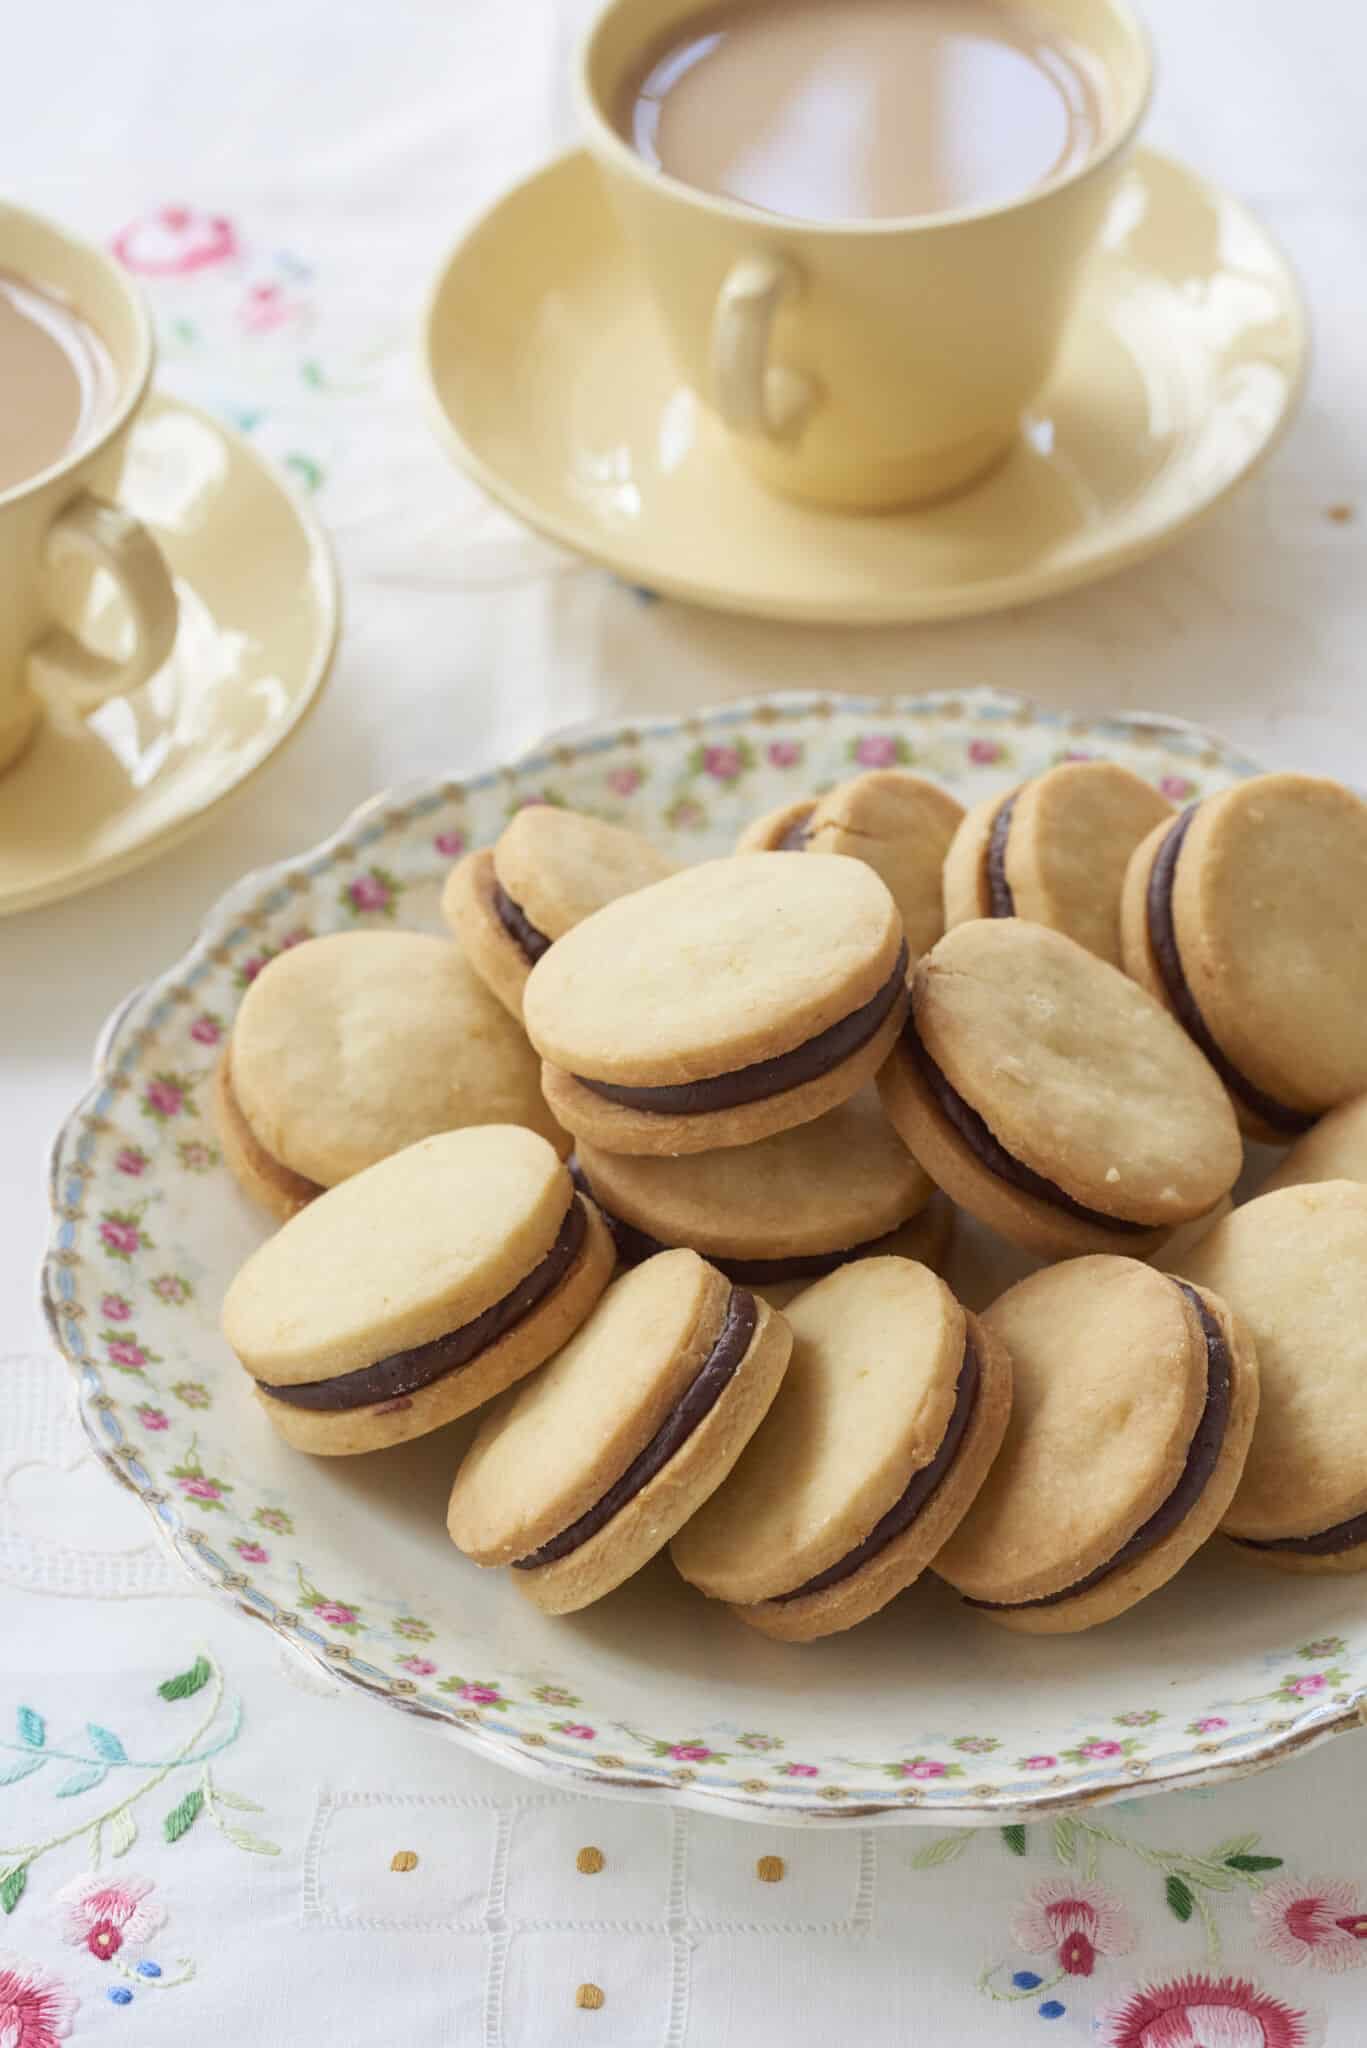 Sandwich cookies Orange Shortbread with Chocolate Orange Truffle Filling are perfectly round. They are served in a large floral platter with two cups of tea. 